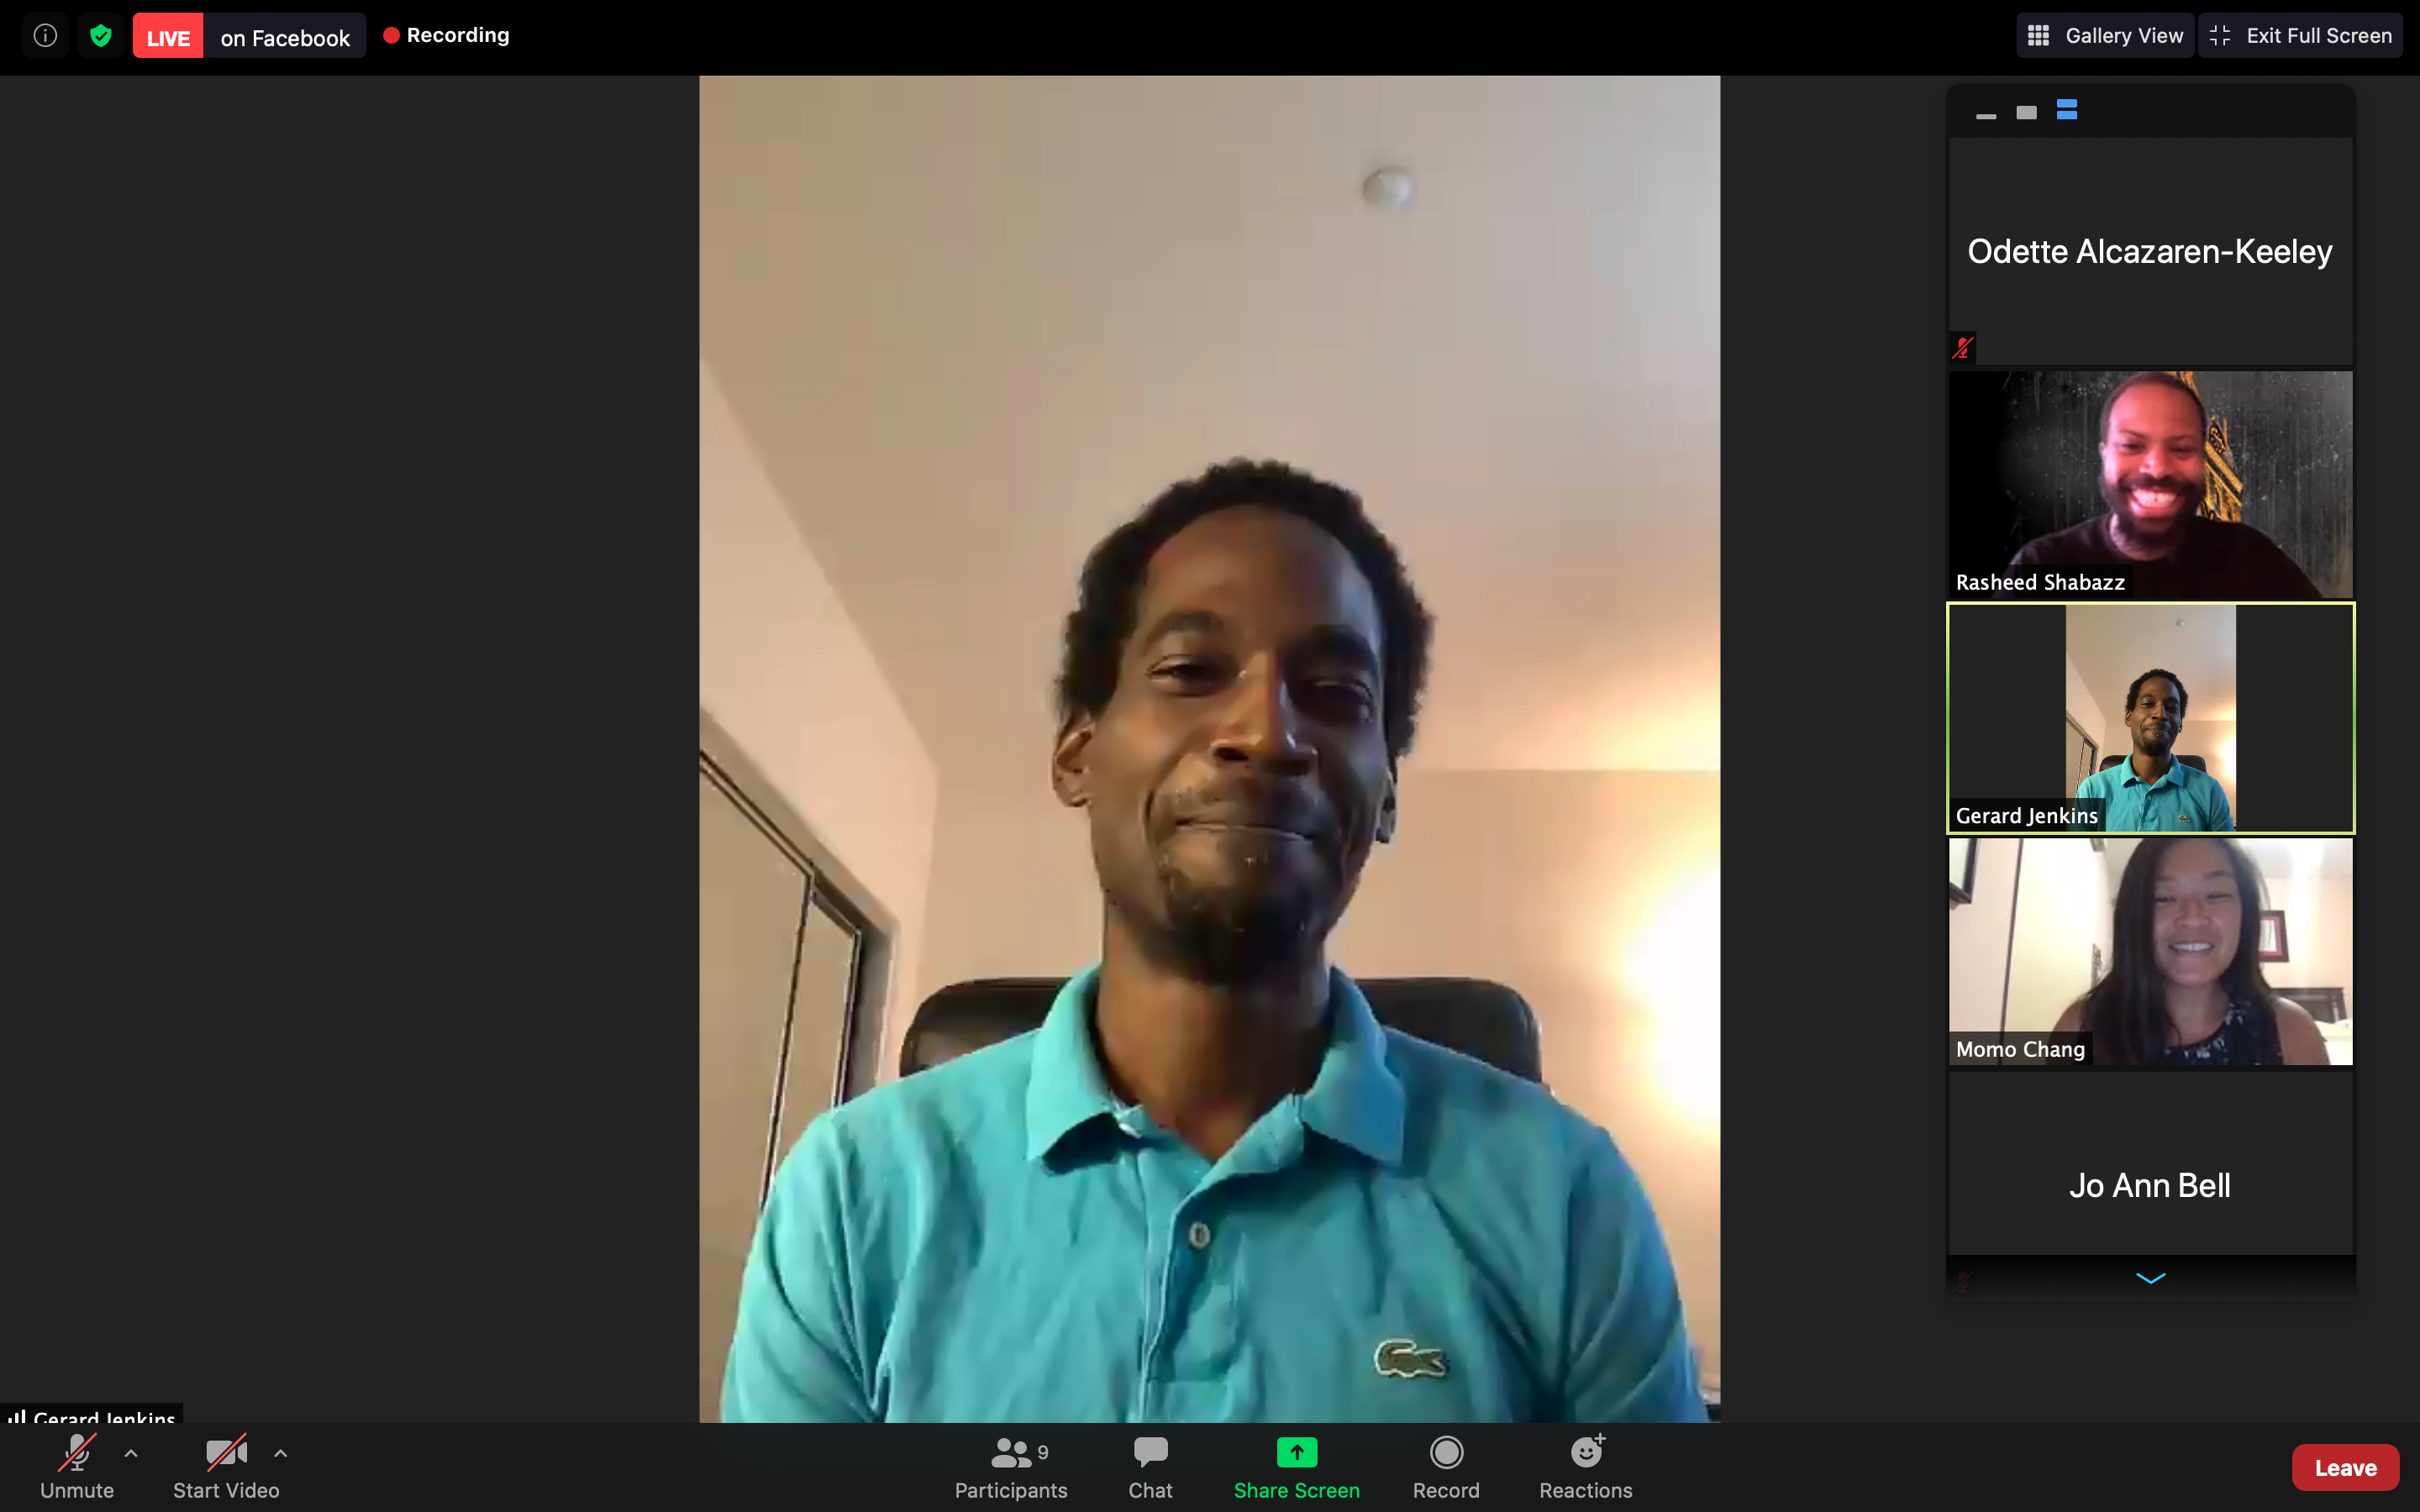 An African American man wearing a turquoise shirt speaks on a Zoom presentation.